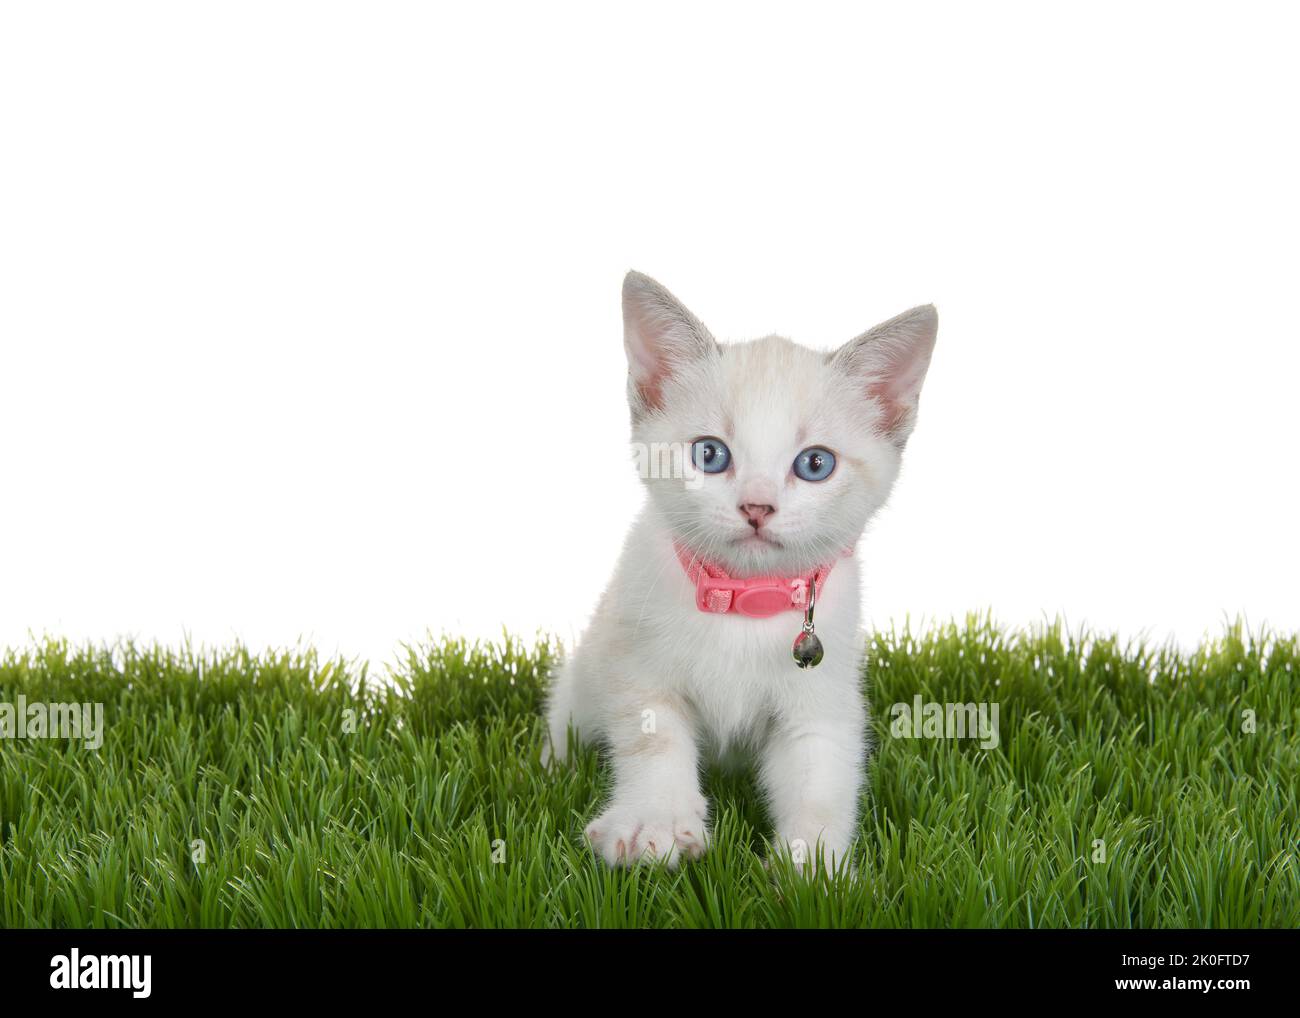 Cute little Siamese mix kitten wearing a pink collar with bell standing in green grass looking directly at viewer, one paw slightly elevated. Isolated Stock Photo